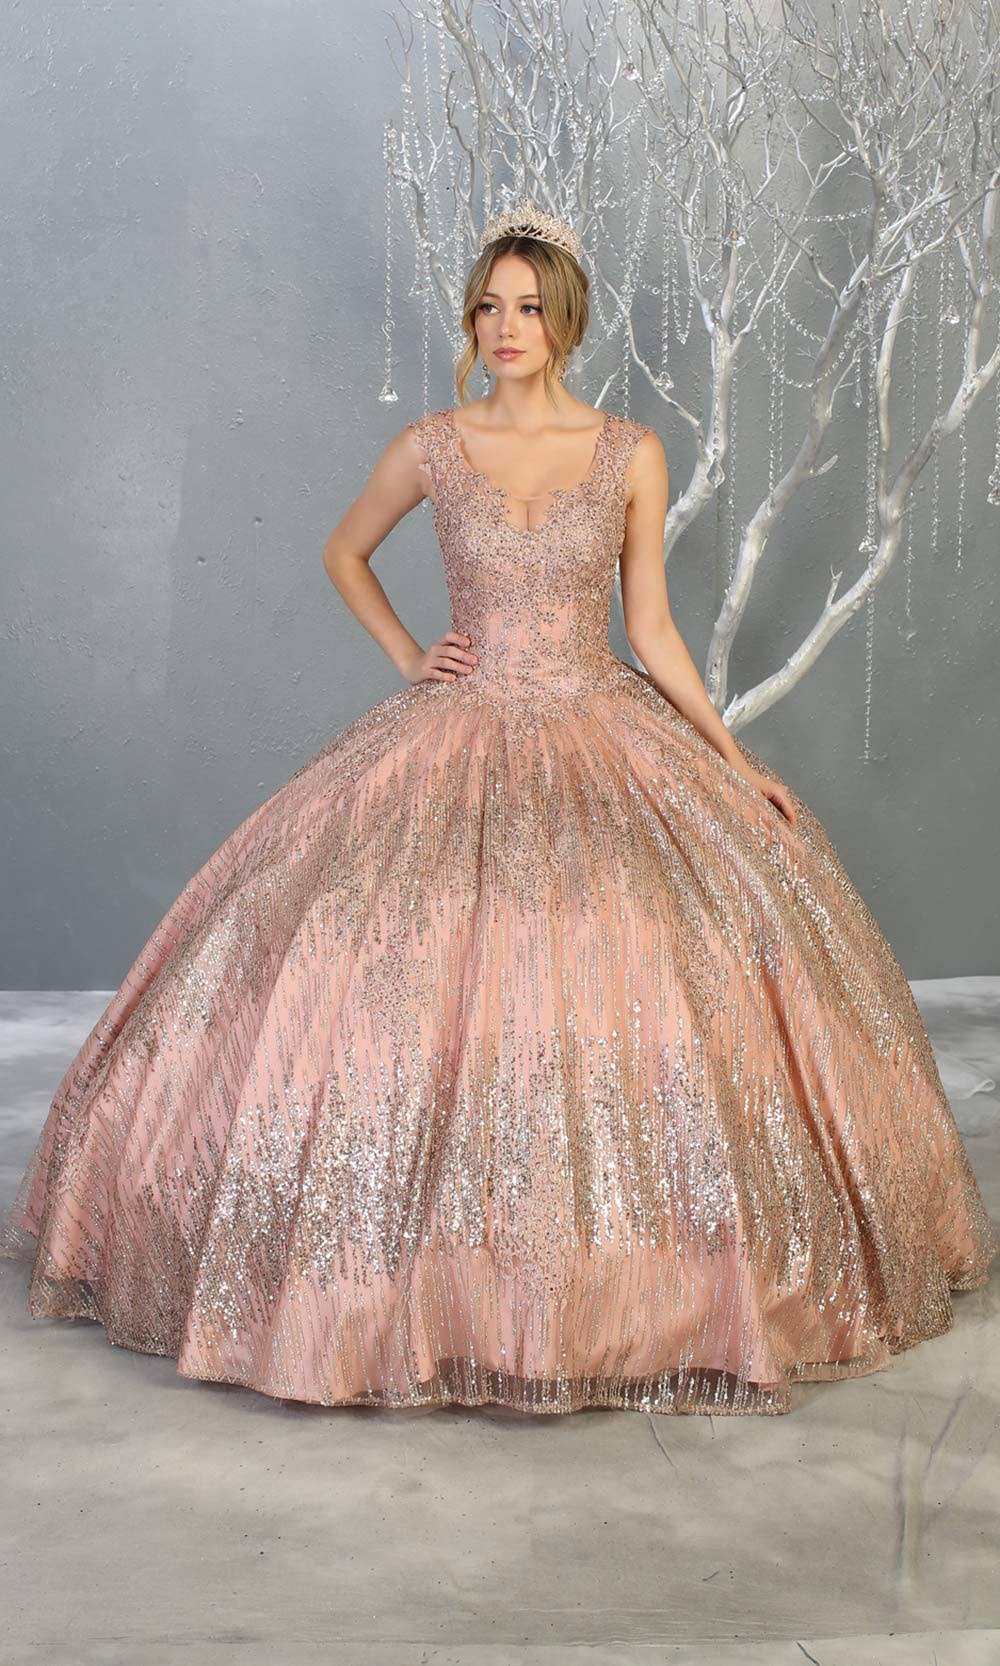 Mayqueen LK147 rose gold quinceanera sequin ballgown. This rose gold shiny ball gown w/ wide strap is perfect for engagement dress, wedding reception, indowestern party gown, sweet 16, debut, sweet 15, sweet 18. Plus sizes available for pink ballgowns.jpg